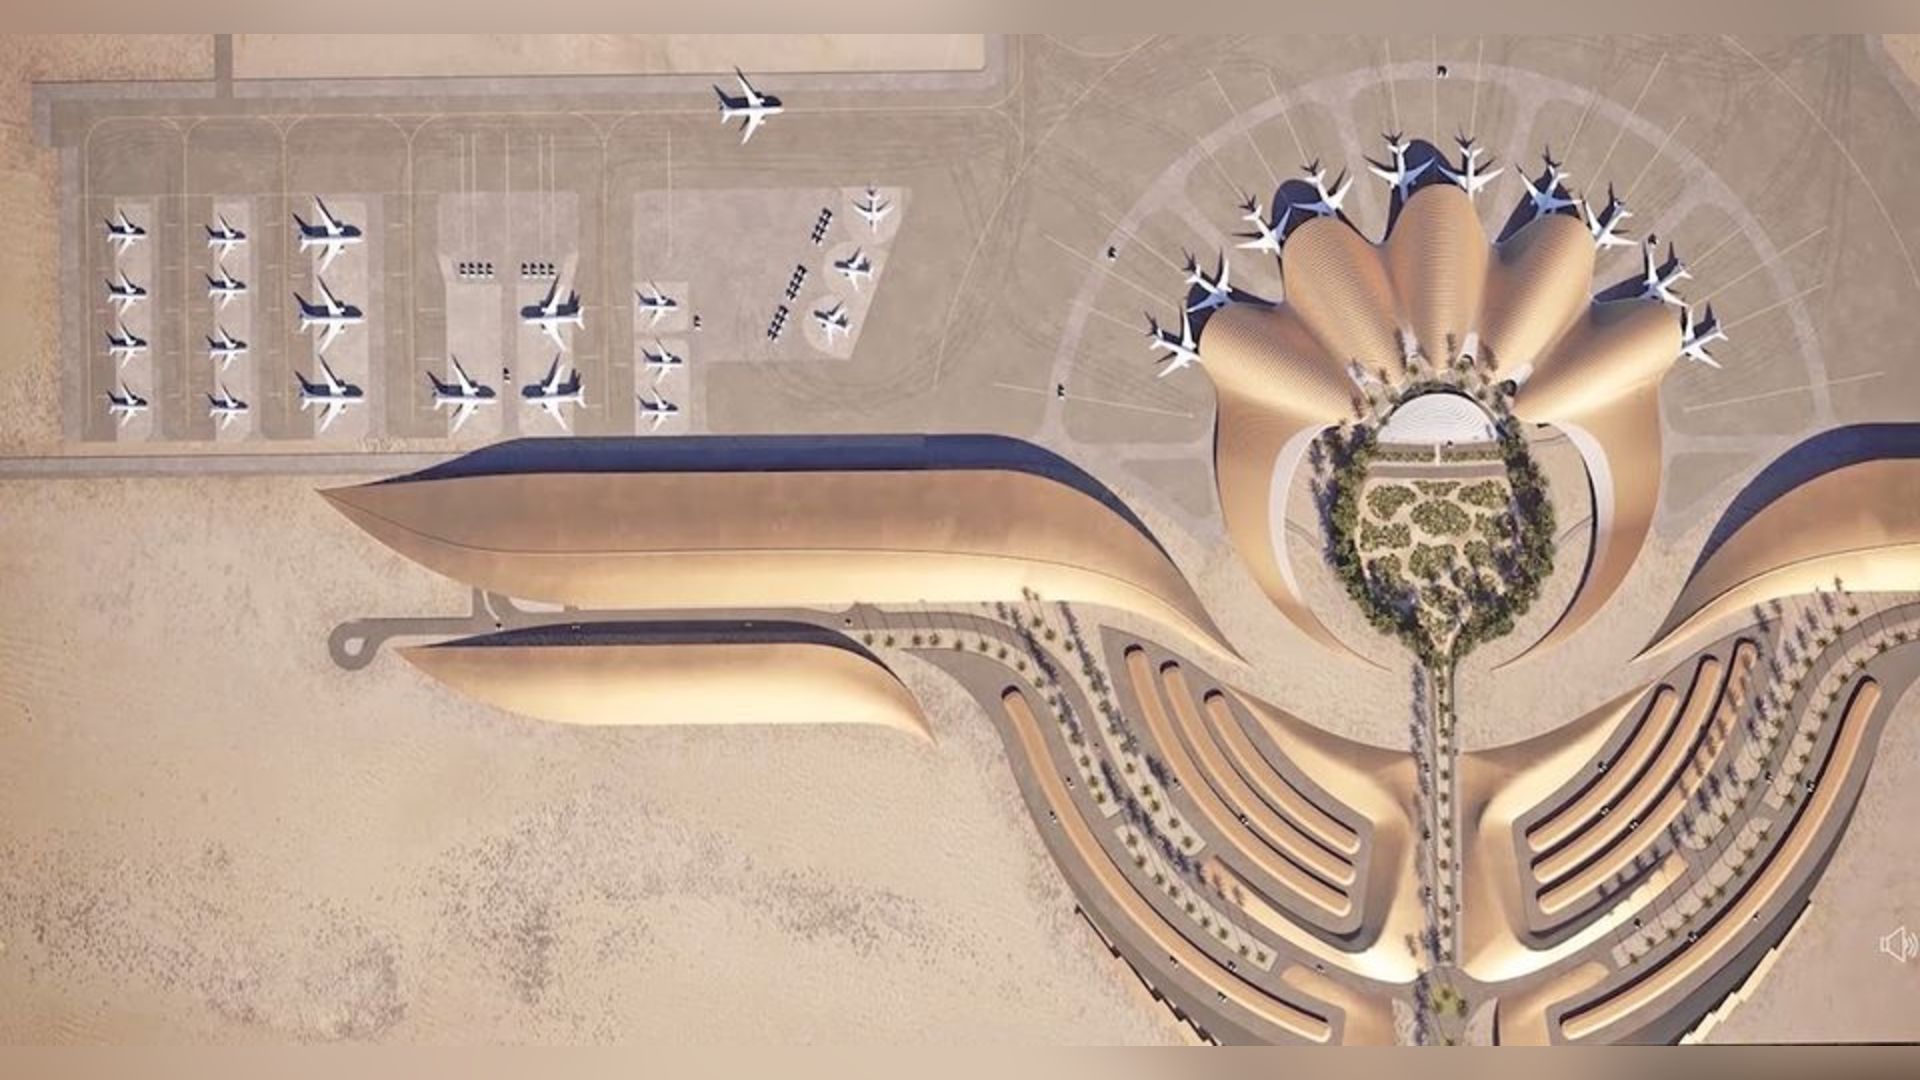 Red Sea Global: Solar-Powered Airport and Regenerative Tourism Project Nears Operation